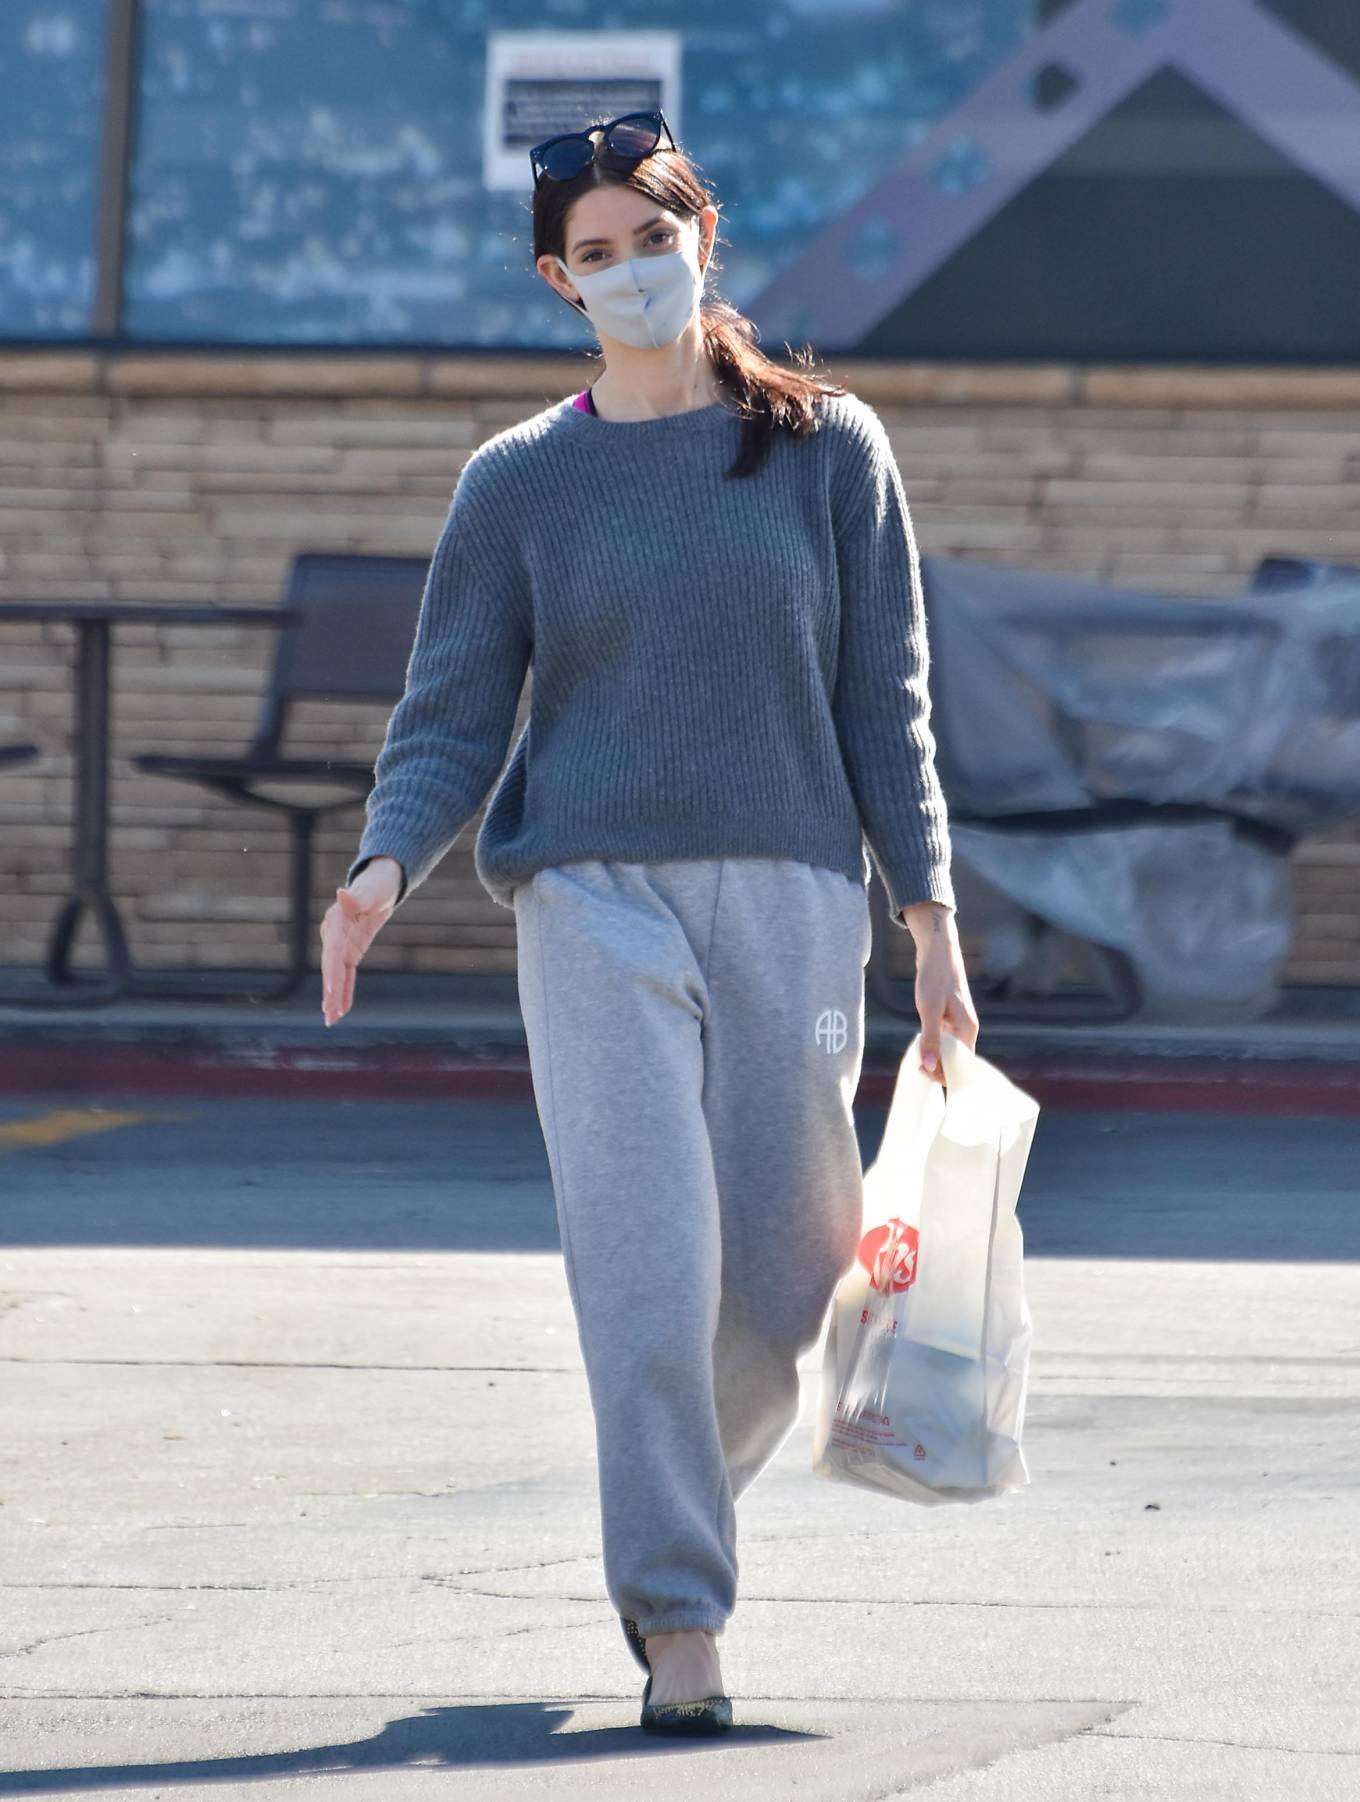 Ashley Greene - In a grey sweatpants seen while out in Los Angeles